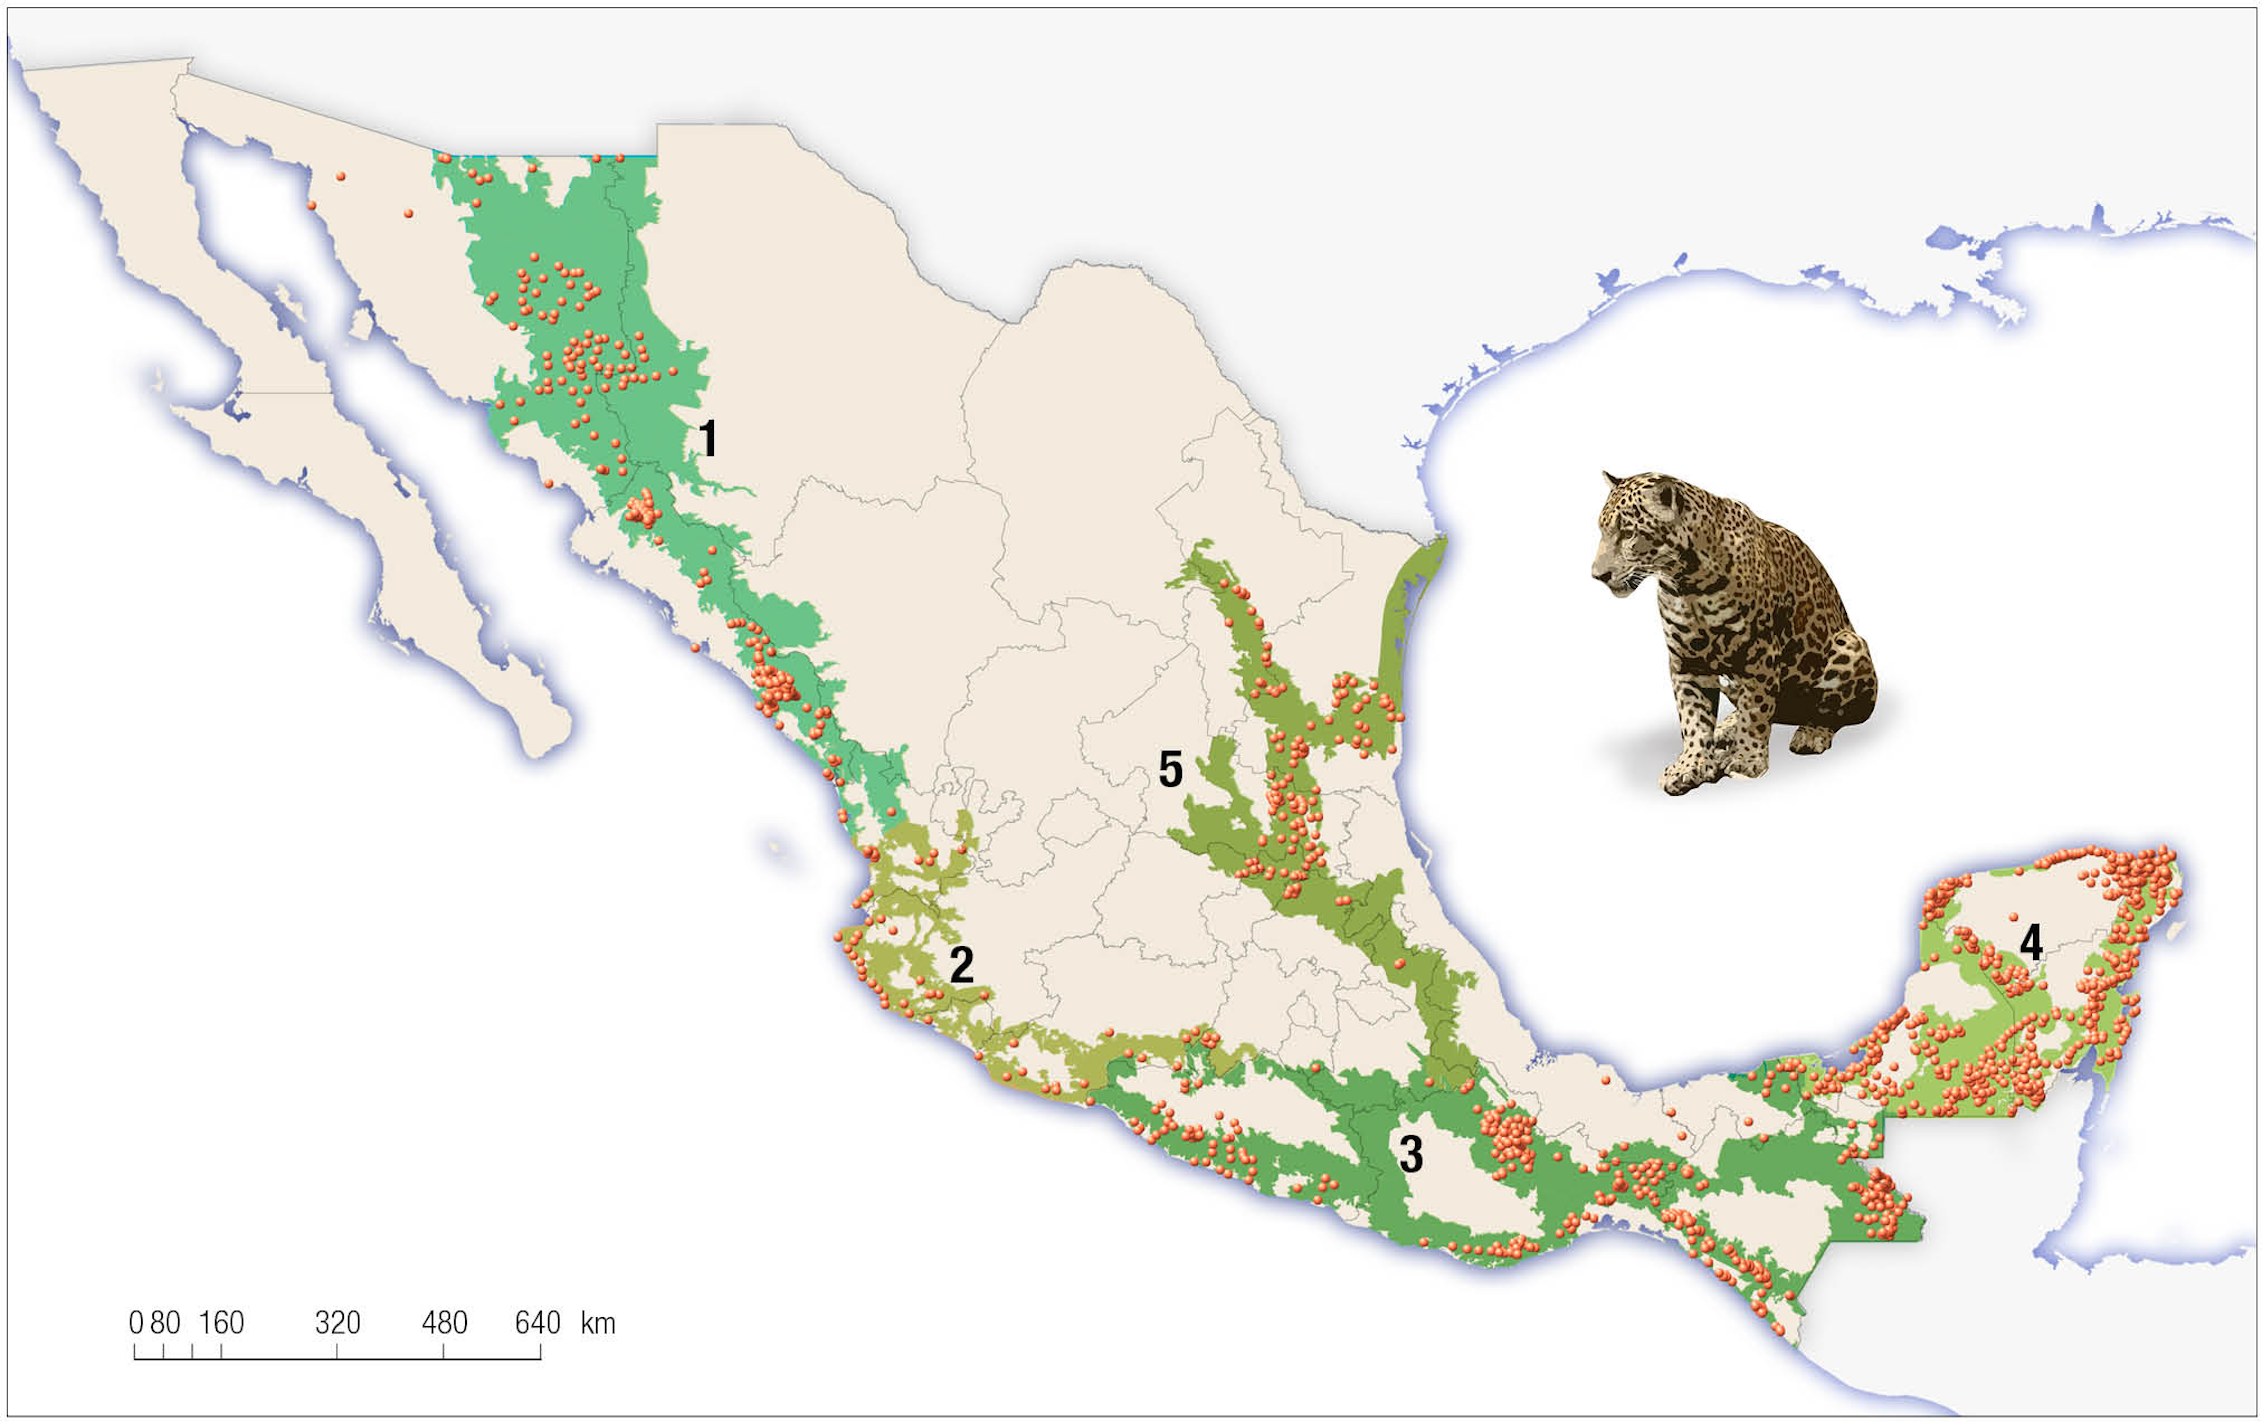 Jaguars Could Return to the US Southwest, But Only If They Have